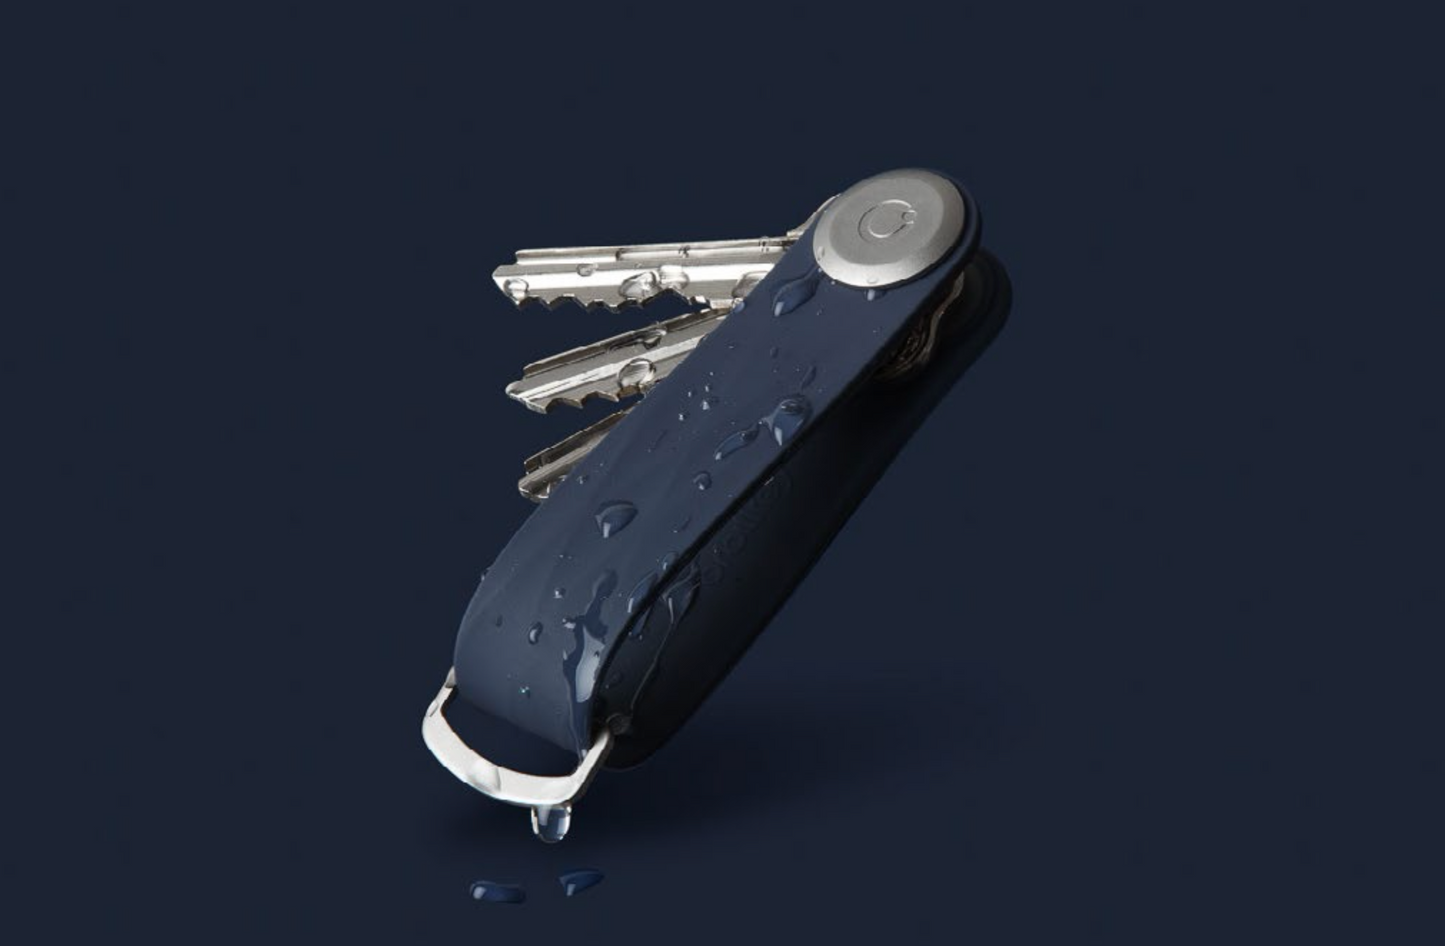 Orbitkey introduces new shades to their Active Range